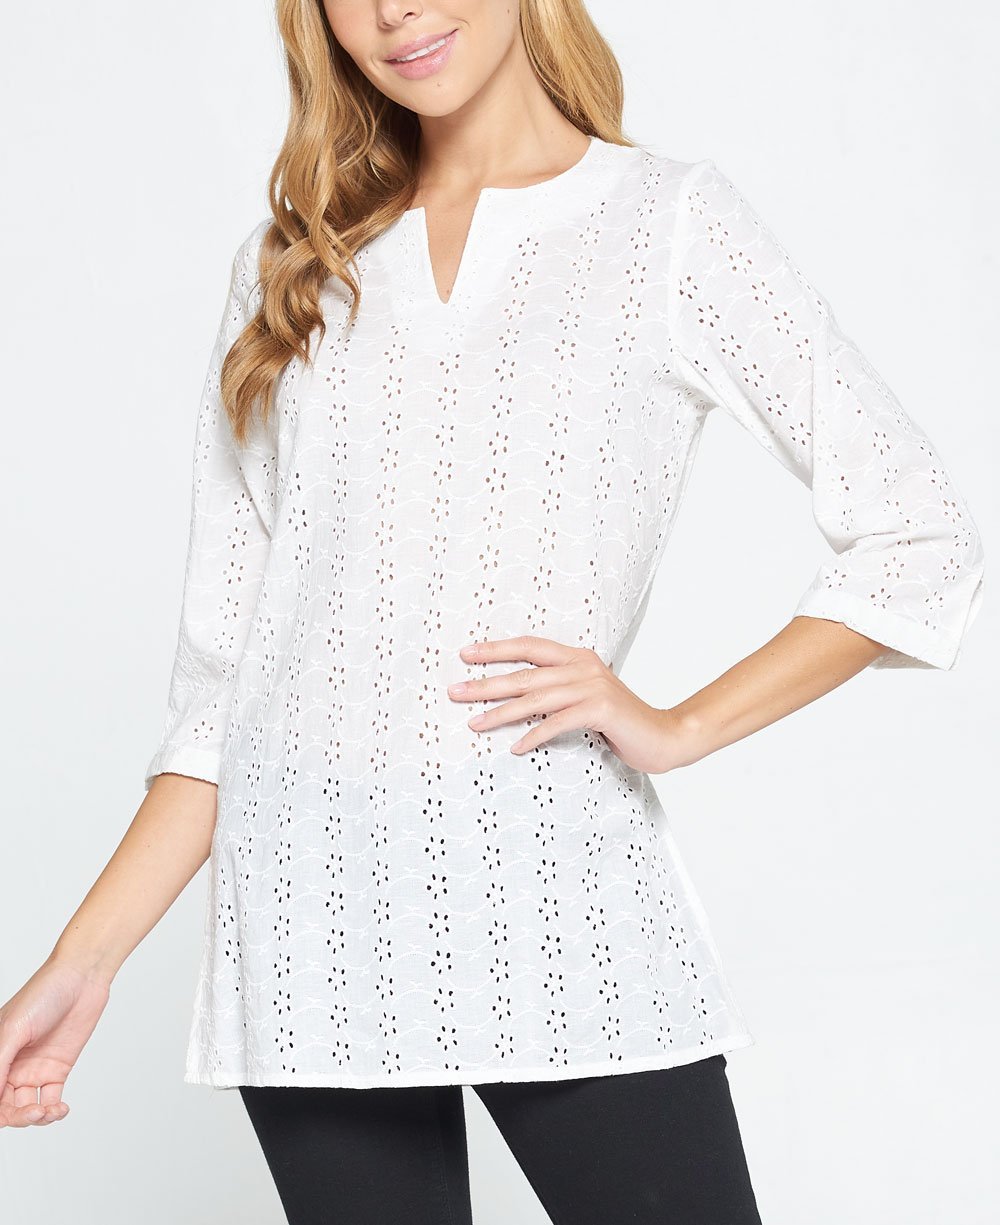 Embroidered Eyelet White Cotton Tunic Top - Shirts & Tops S